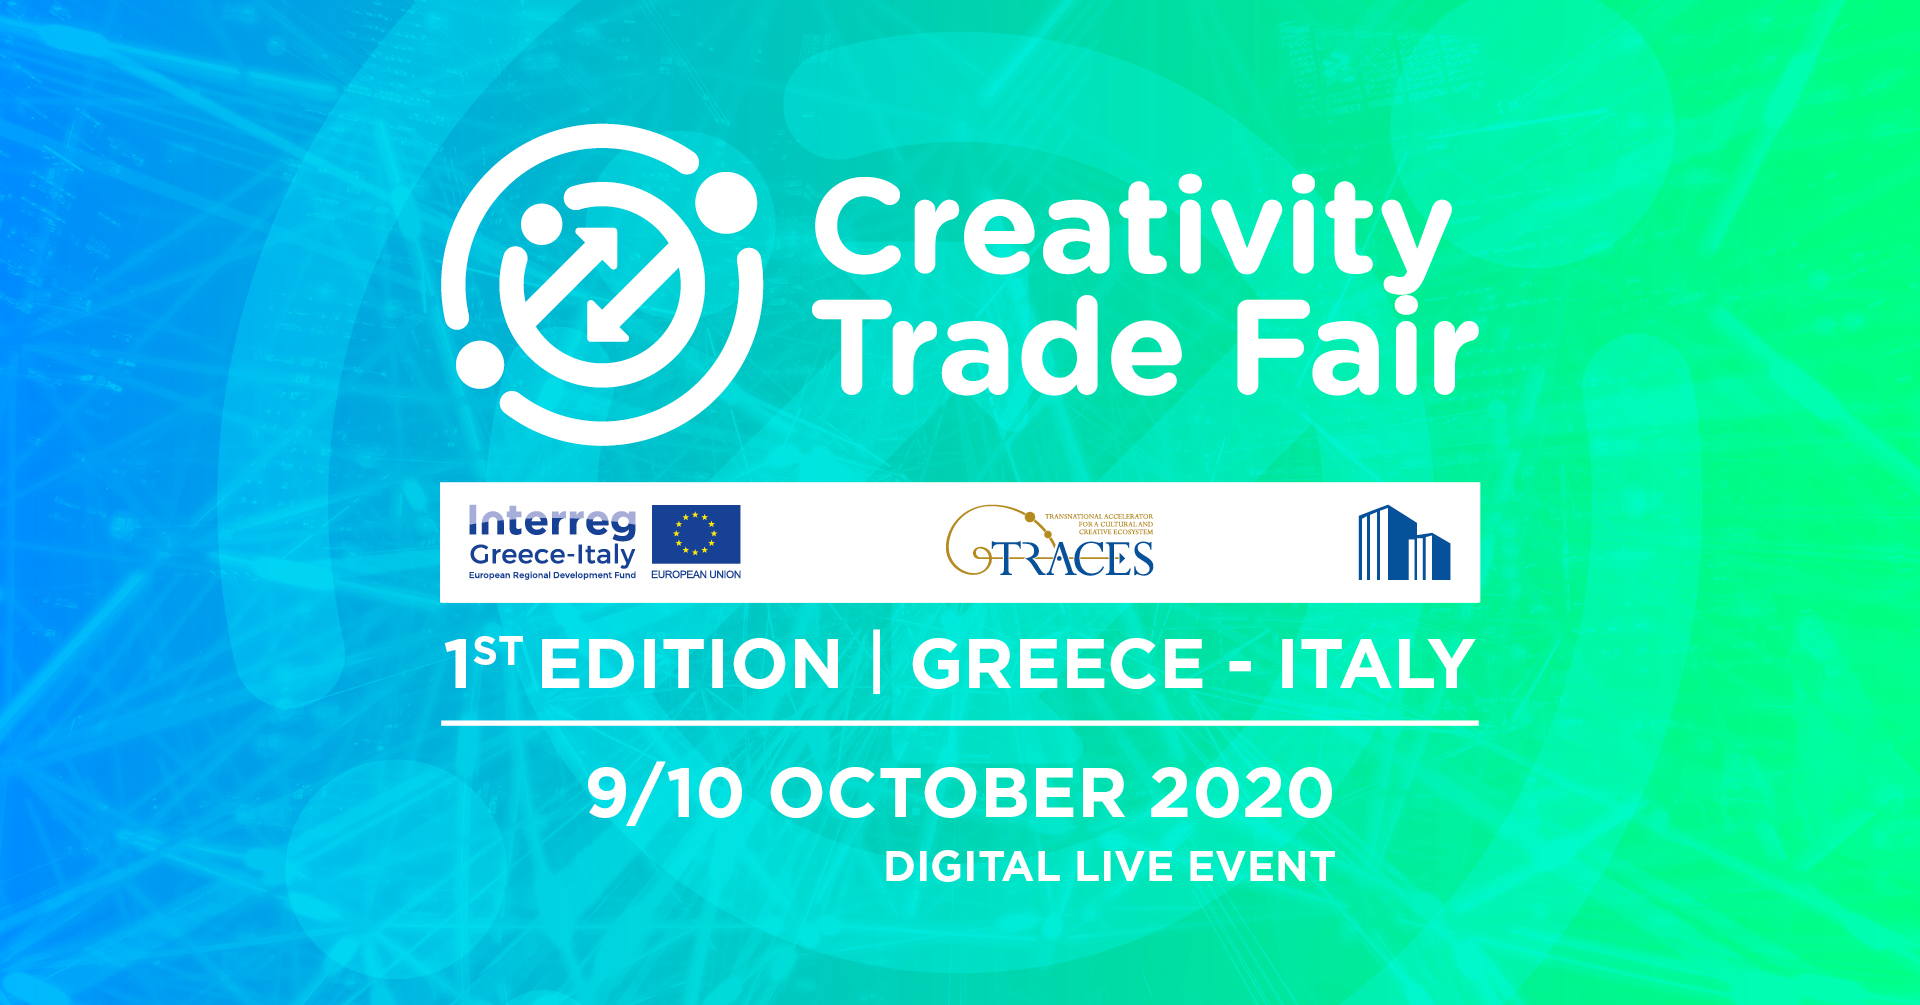 “CREATIVITY TRADE FAIR”: ON FRIDAY 9 AND SATURDAY 10 OCTOBER THE FIRST DIGITAL FAIR DEDICATED TO CULTURE AND CREATIVITY